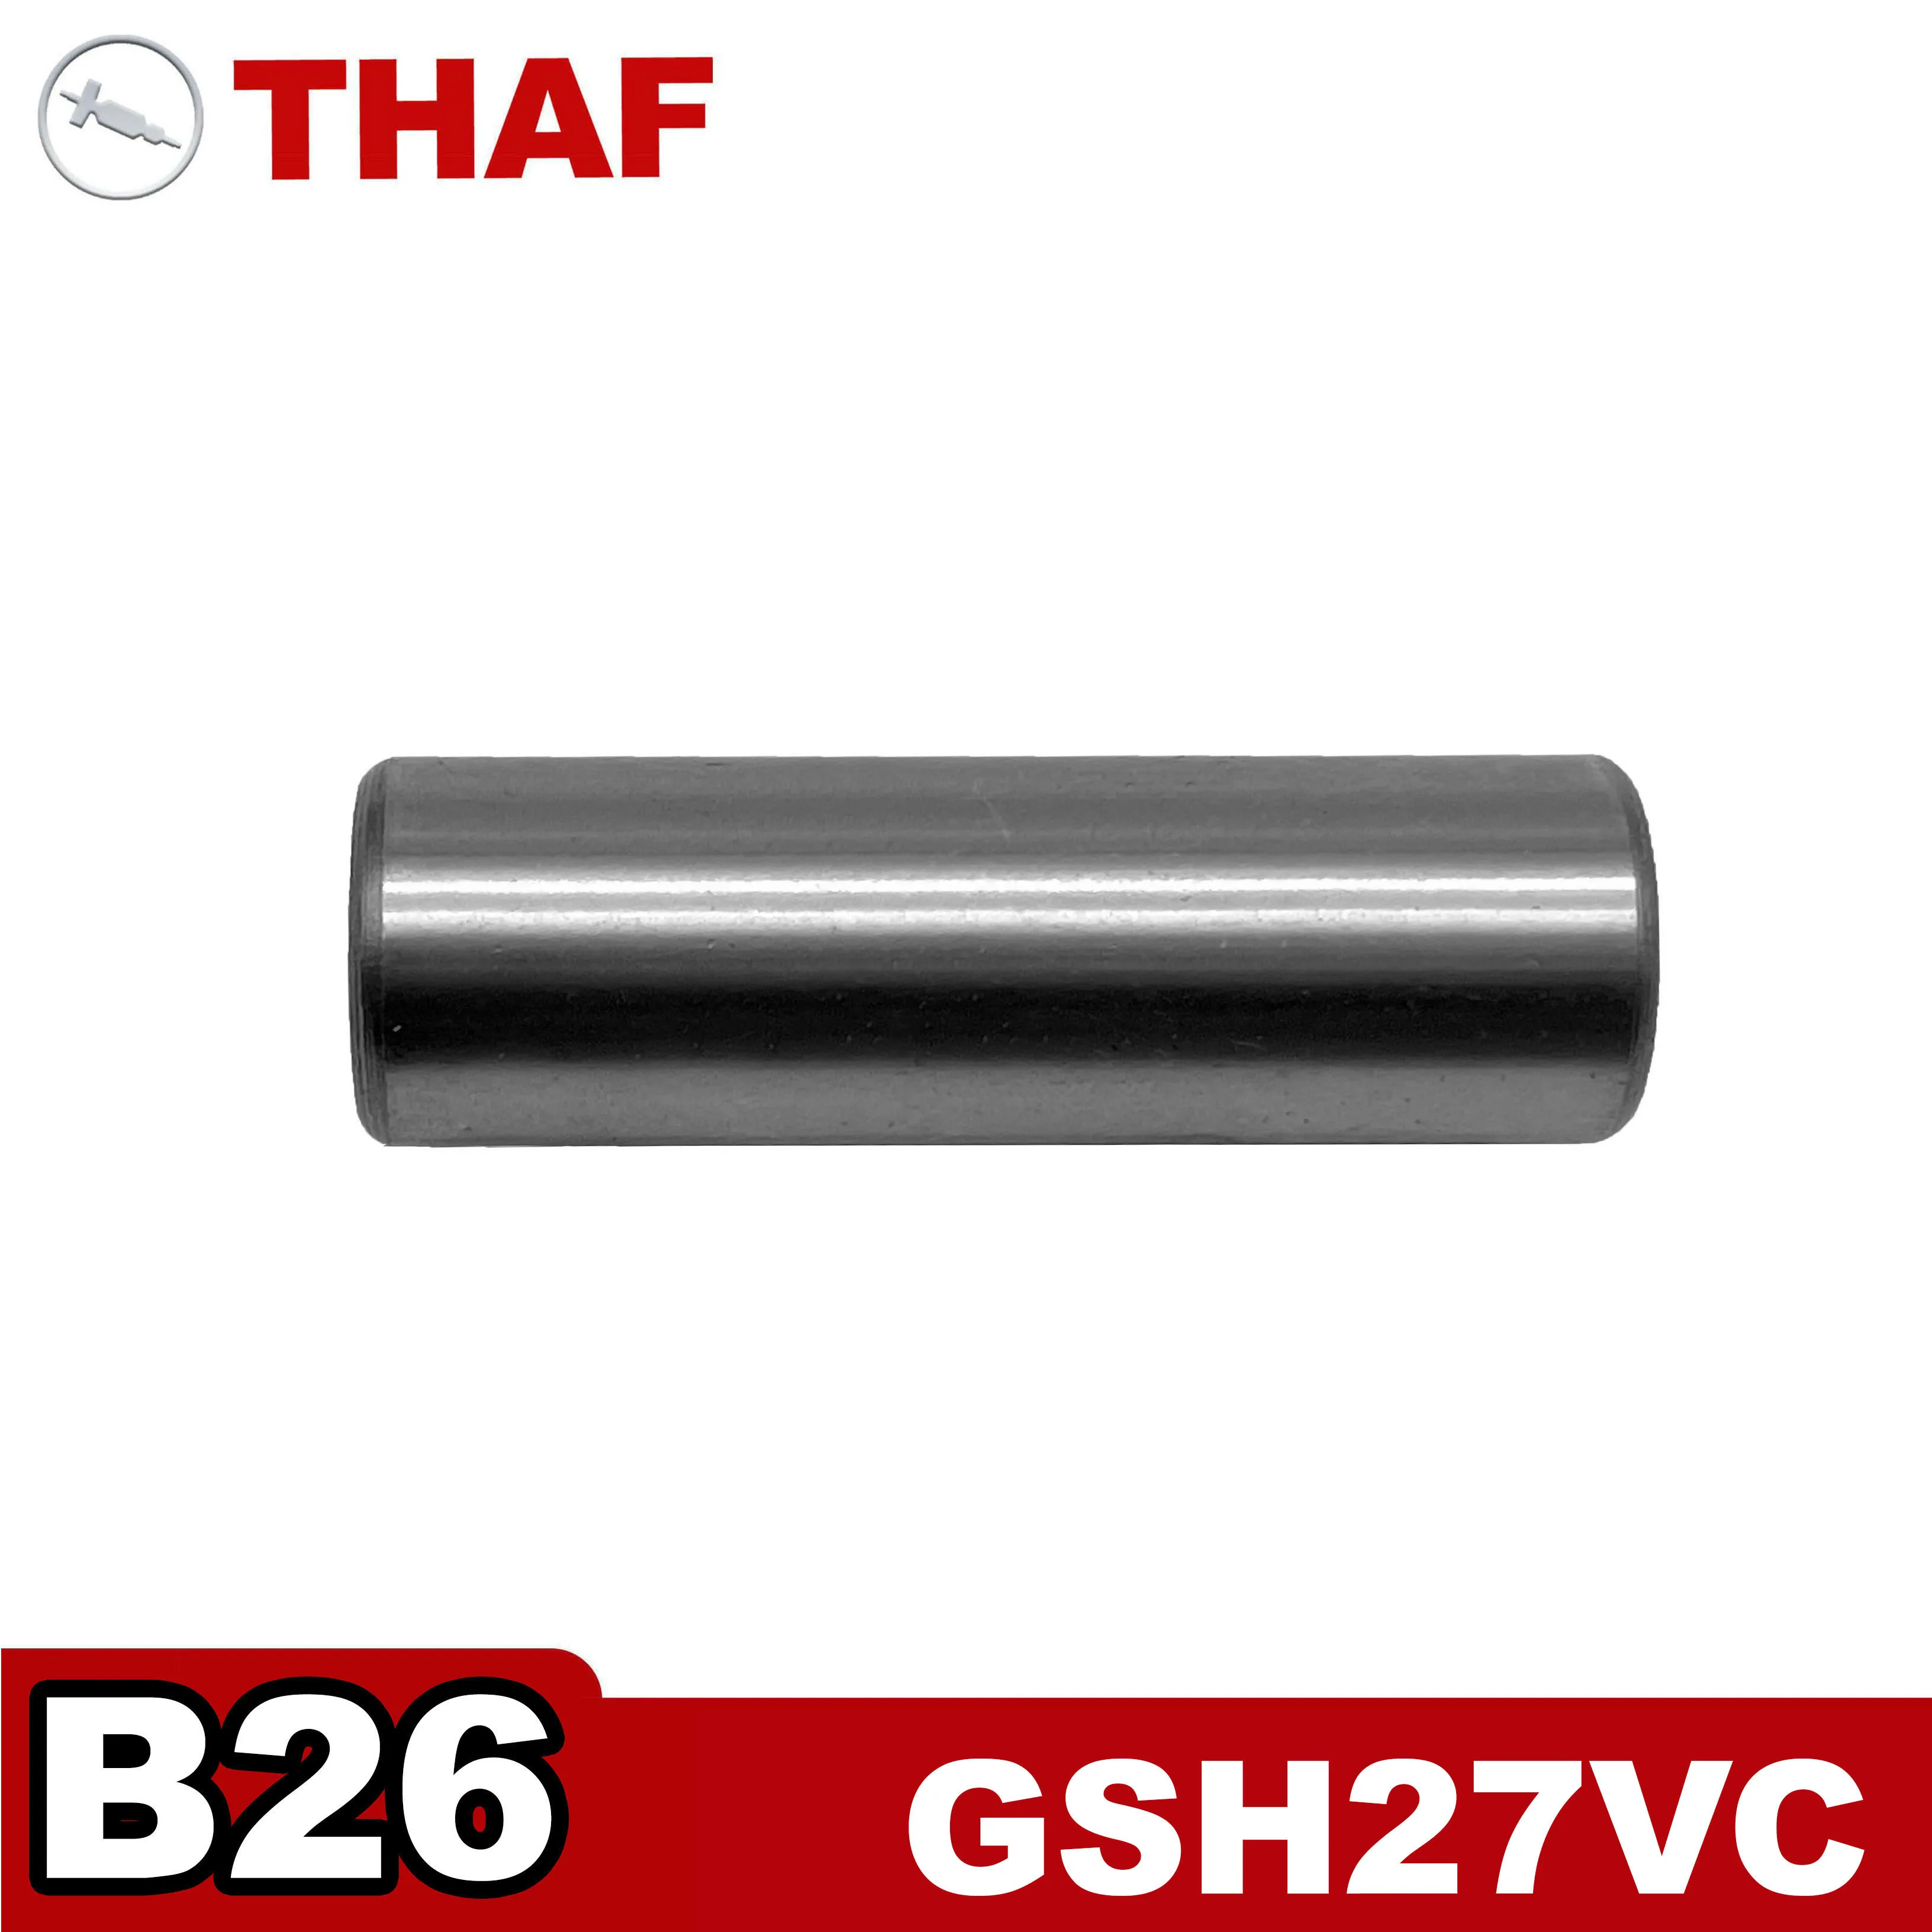 

Bearing Bolt Replacement Spare Parts for Bosch Demolition Hammer GSH27 GSH27VC B26